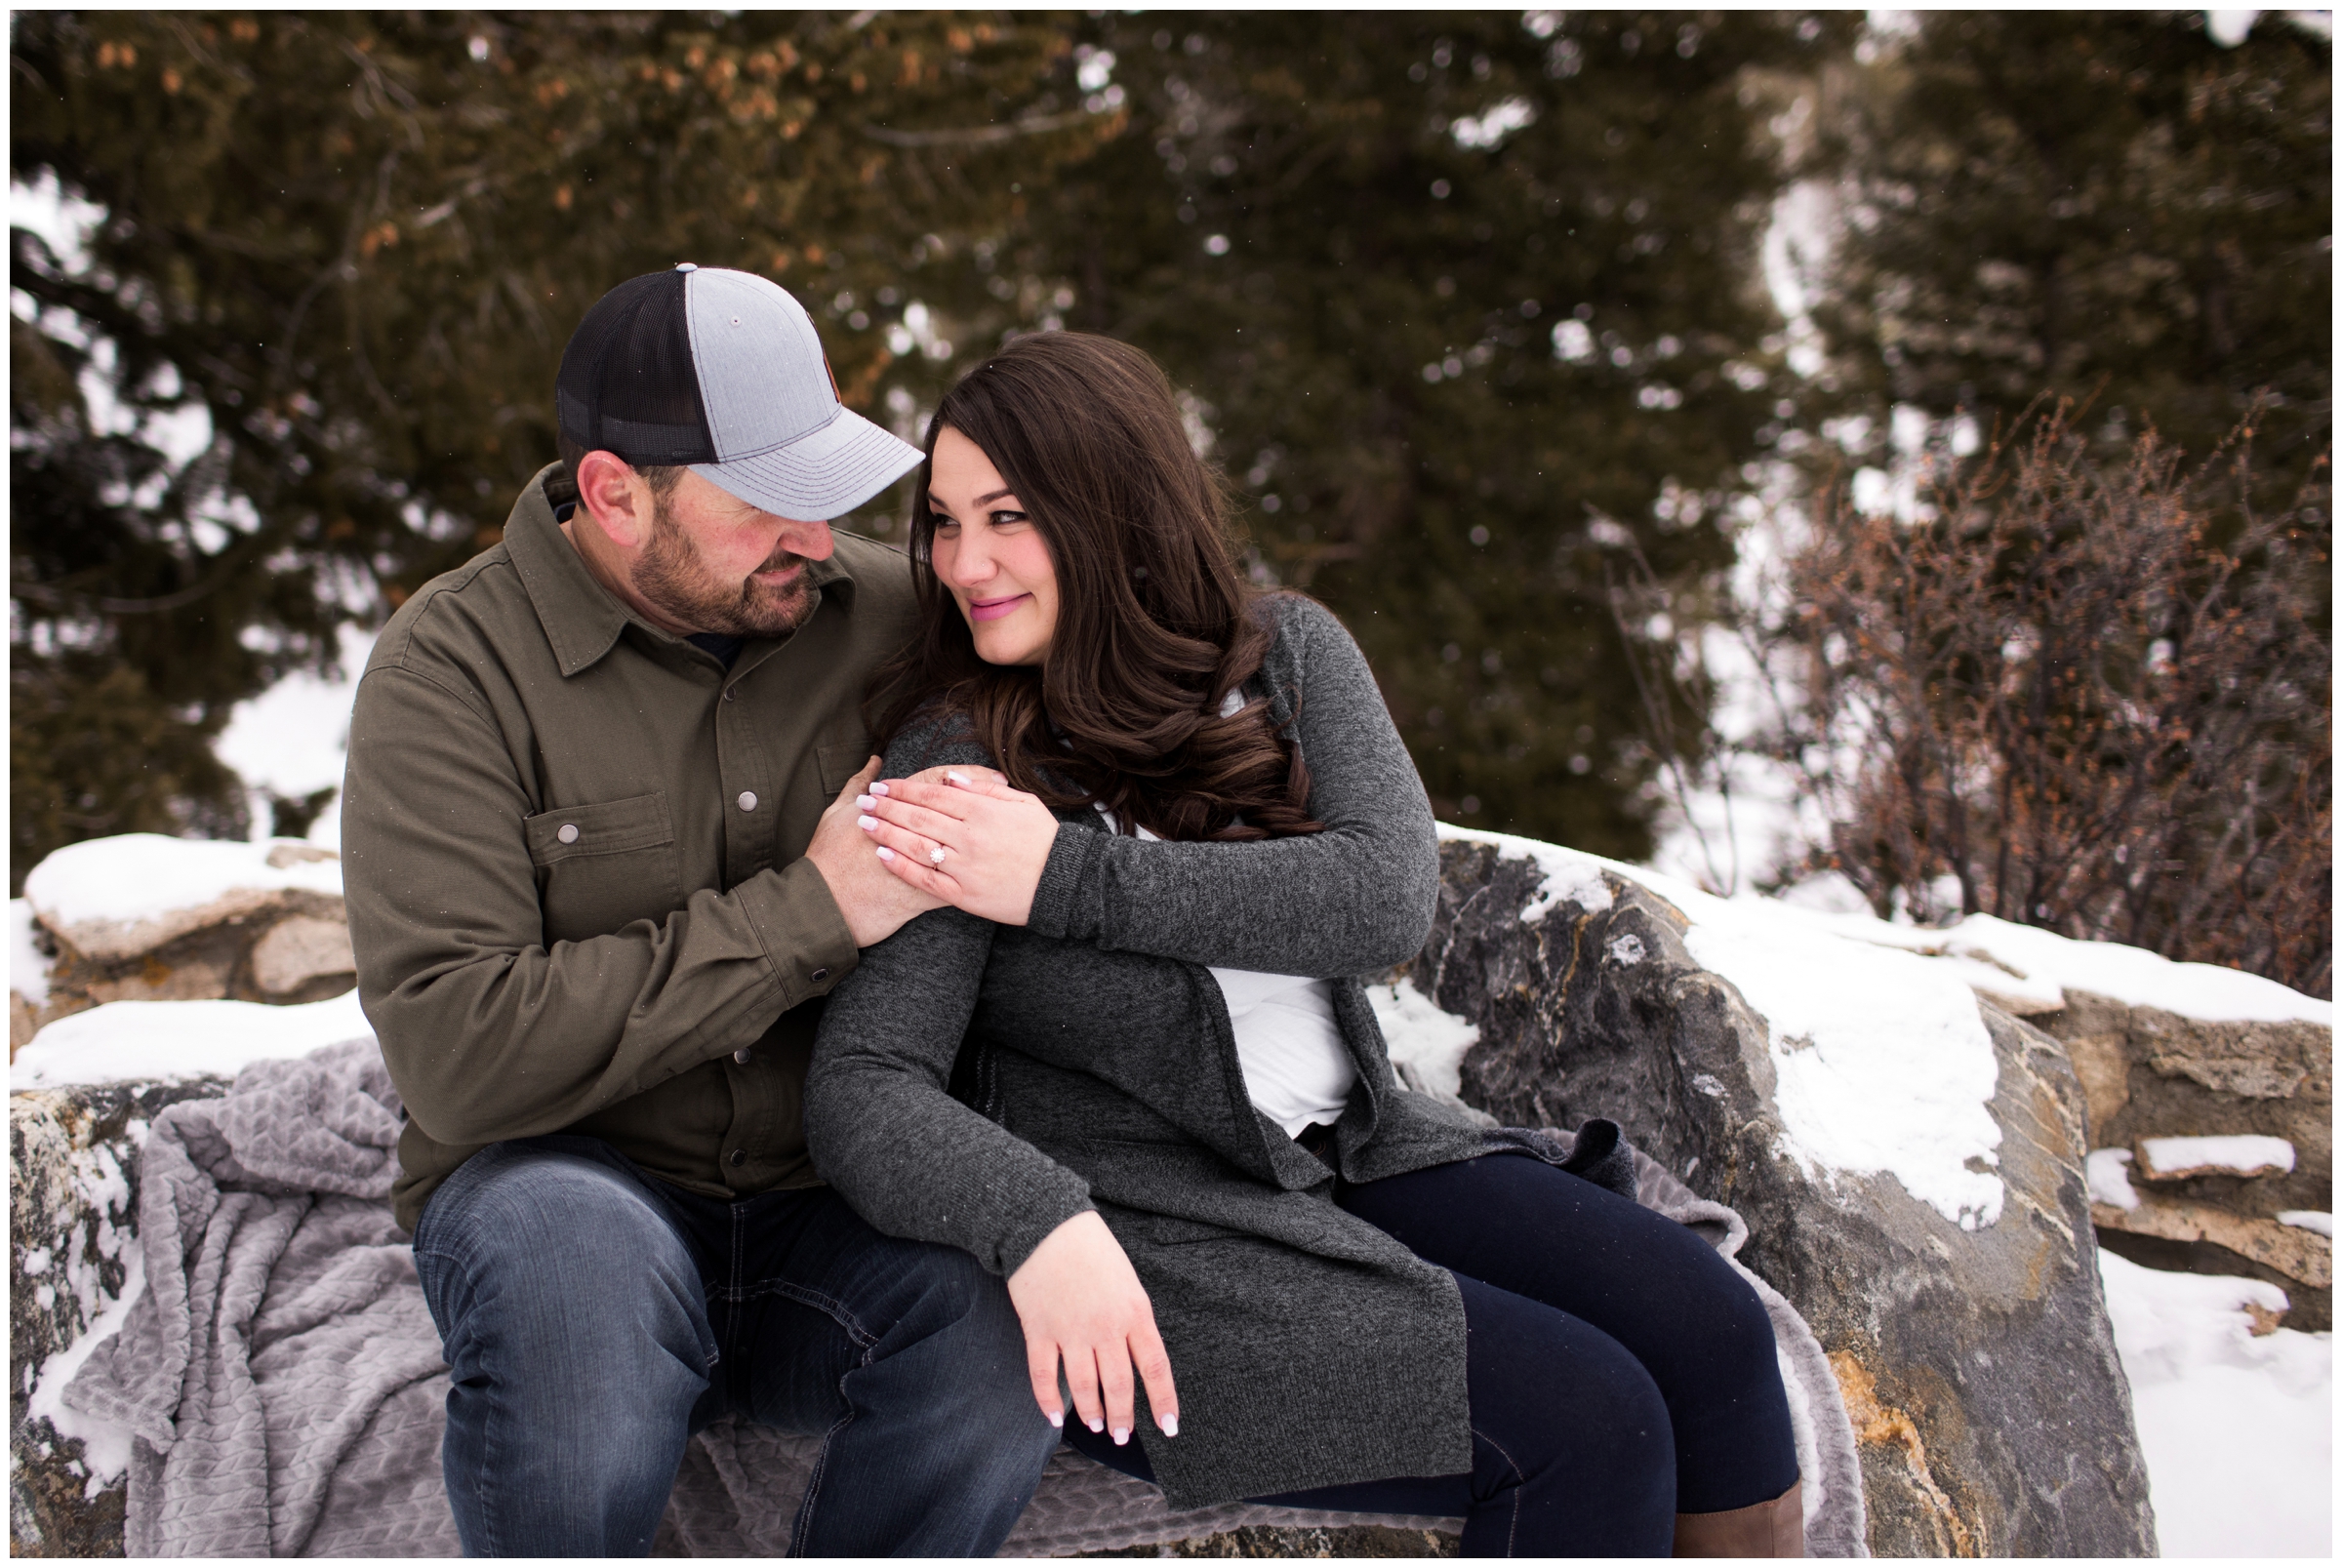 Colorado winter engagement photo inspiration in the snow